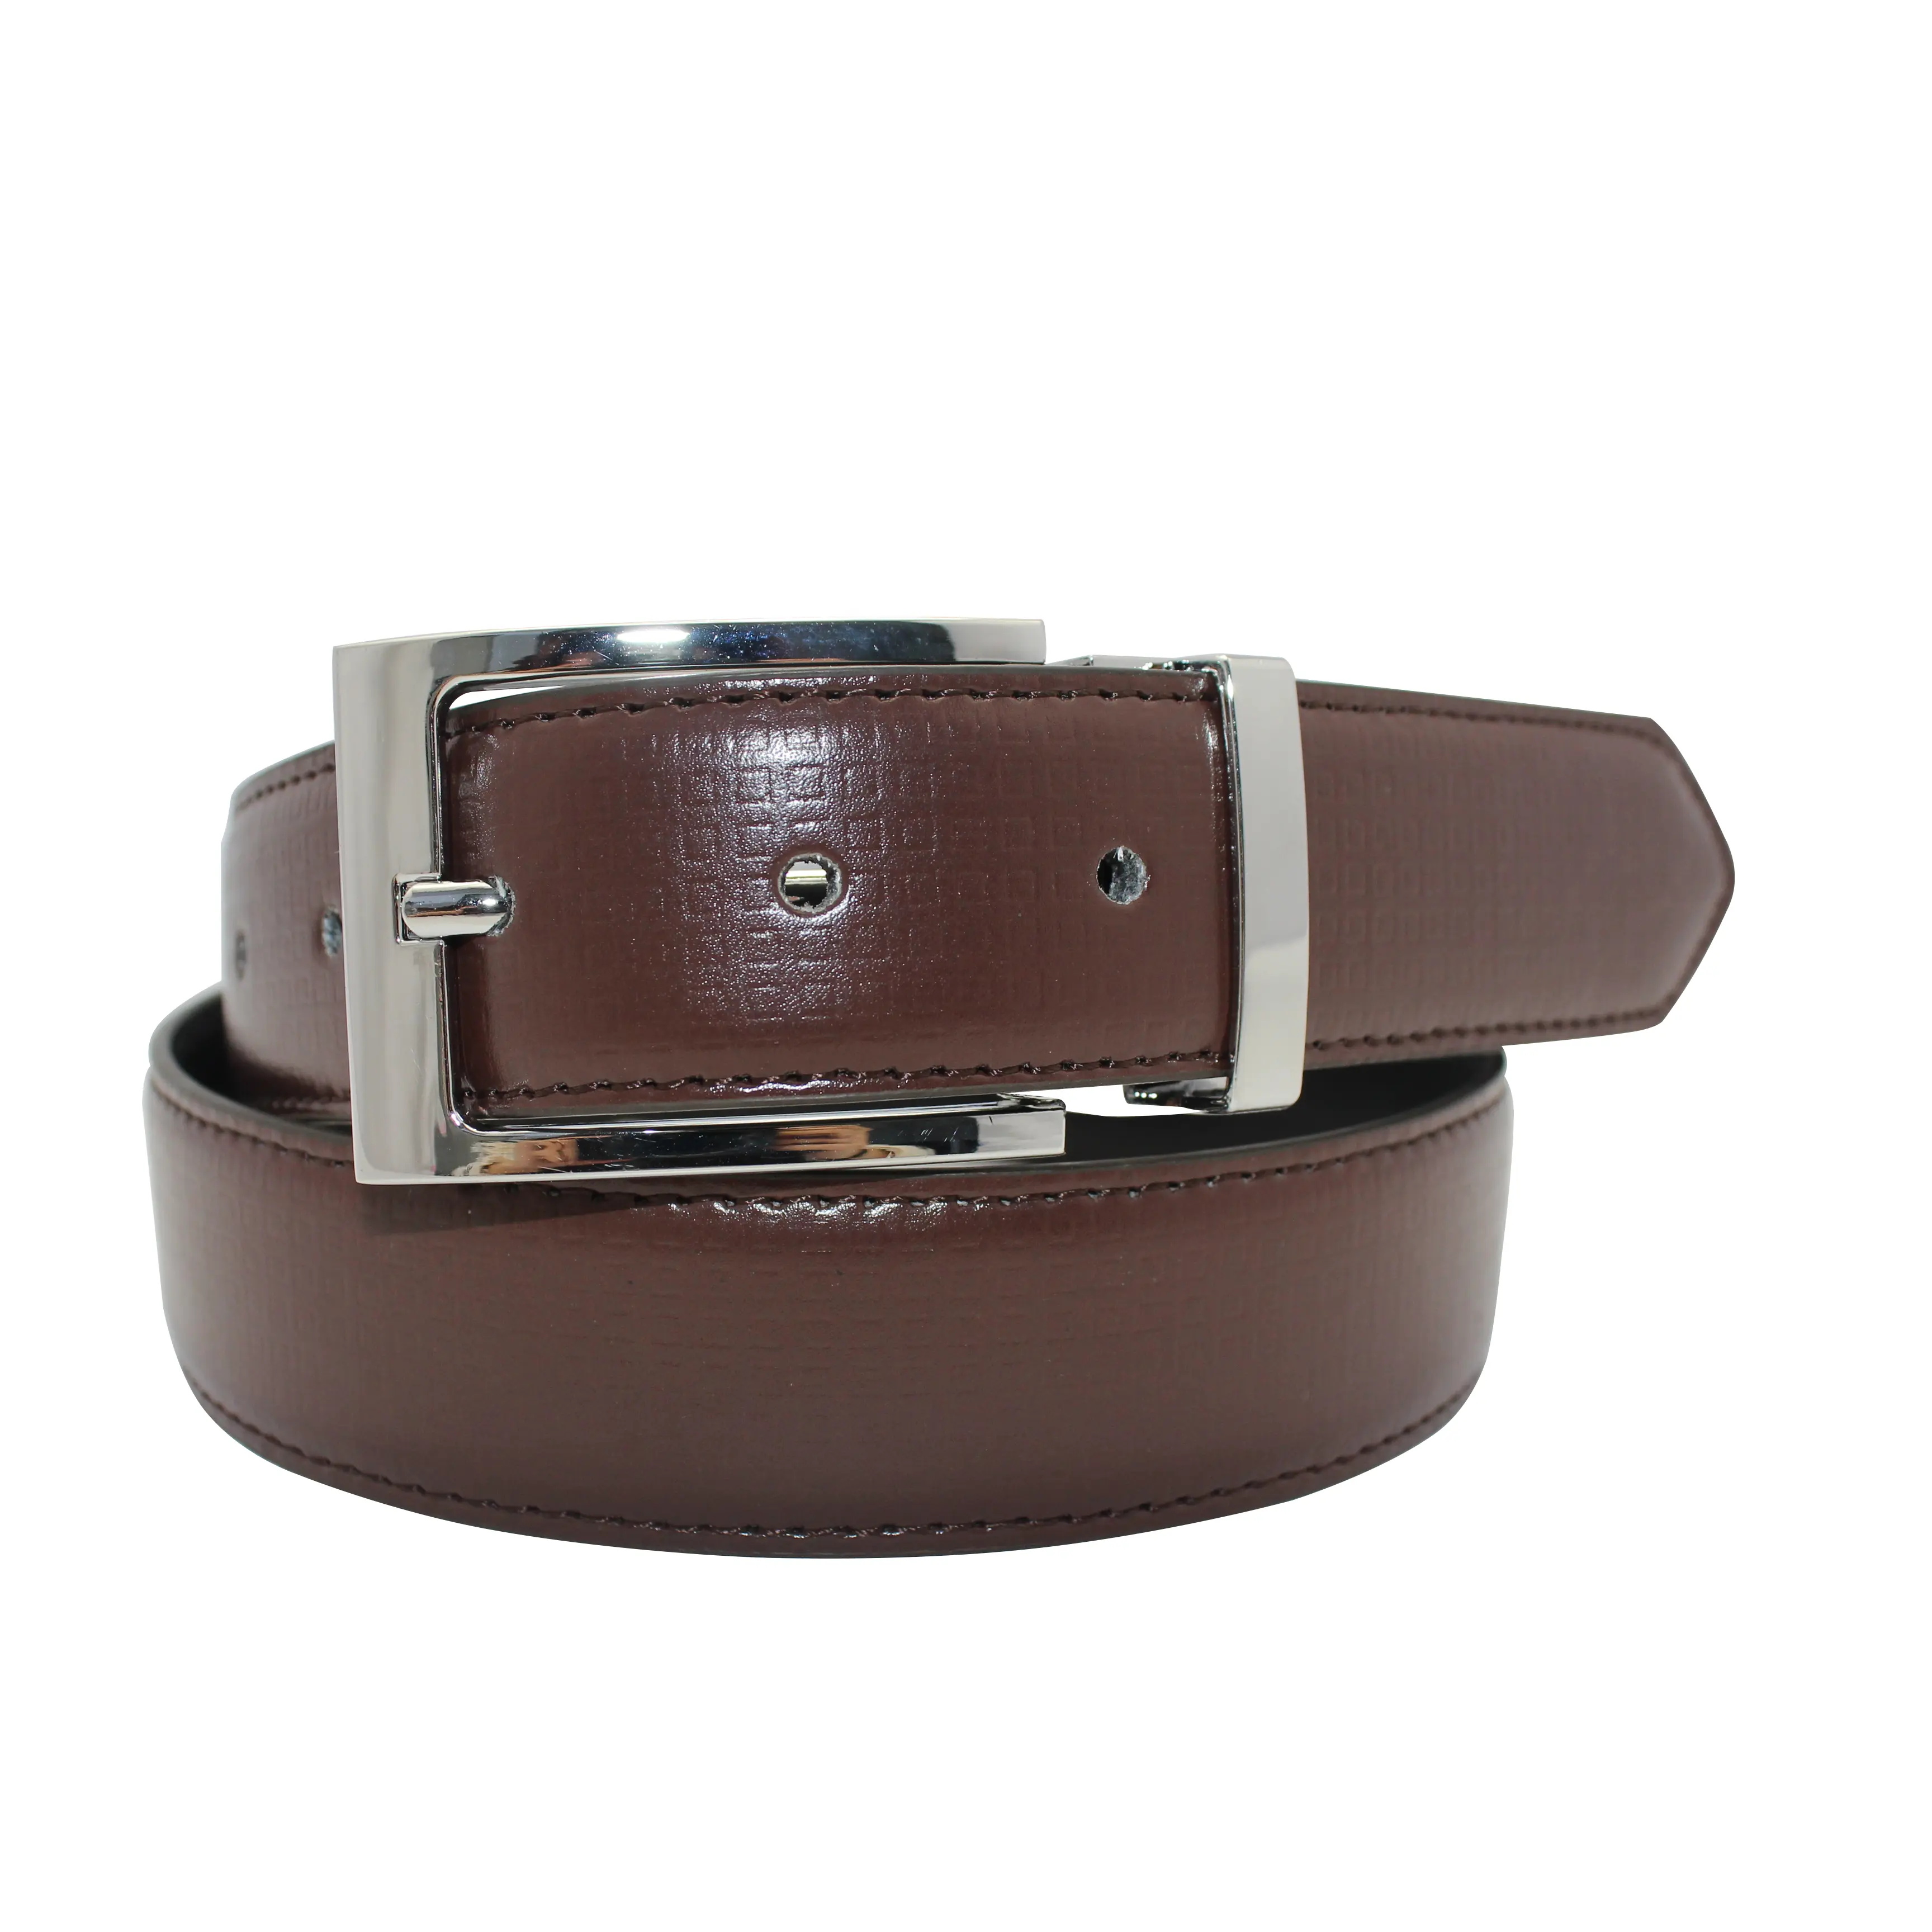 Reversible Belts: A Quality Accessory for Your Wardrobe